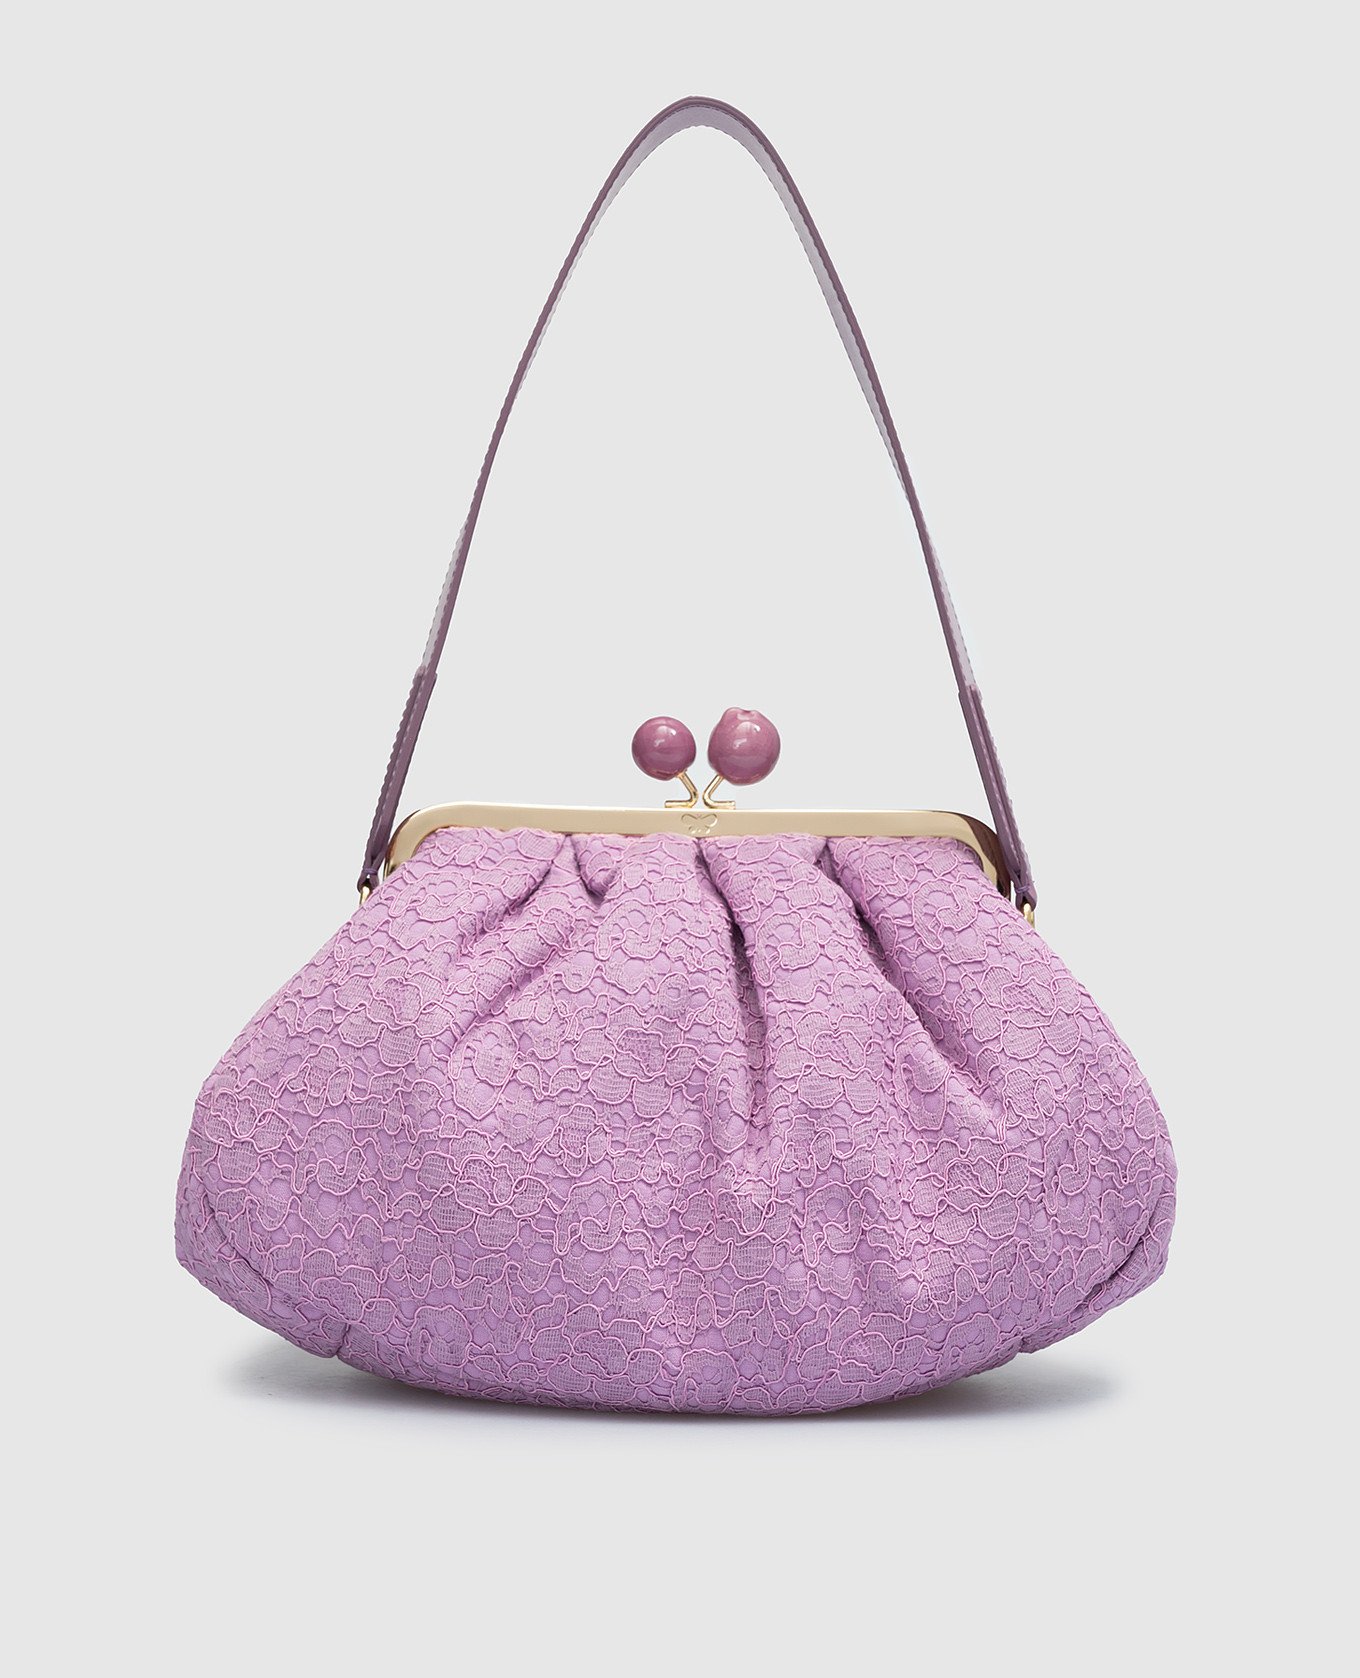 Purple bag with lace